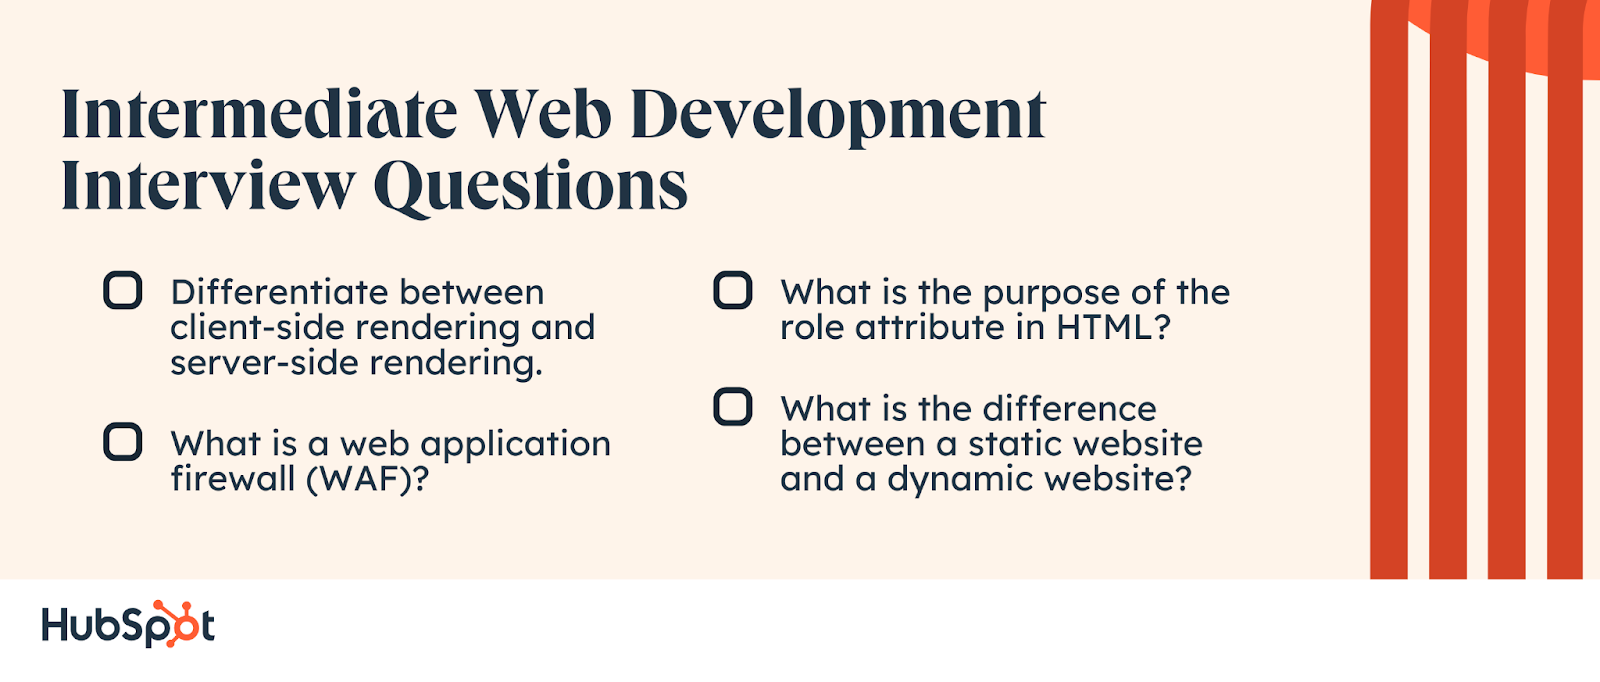 Intermediate Web Development Interview Questions. Differentiate between client-side rendering and server-side rendering. What is the purpose of the role attribute in HTML? What is the difference between a static website and a dynamic website? What is a web application firewall (WAF)?